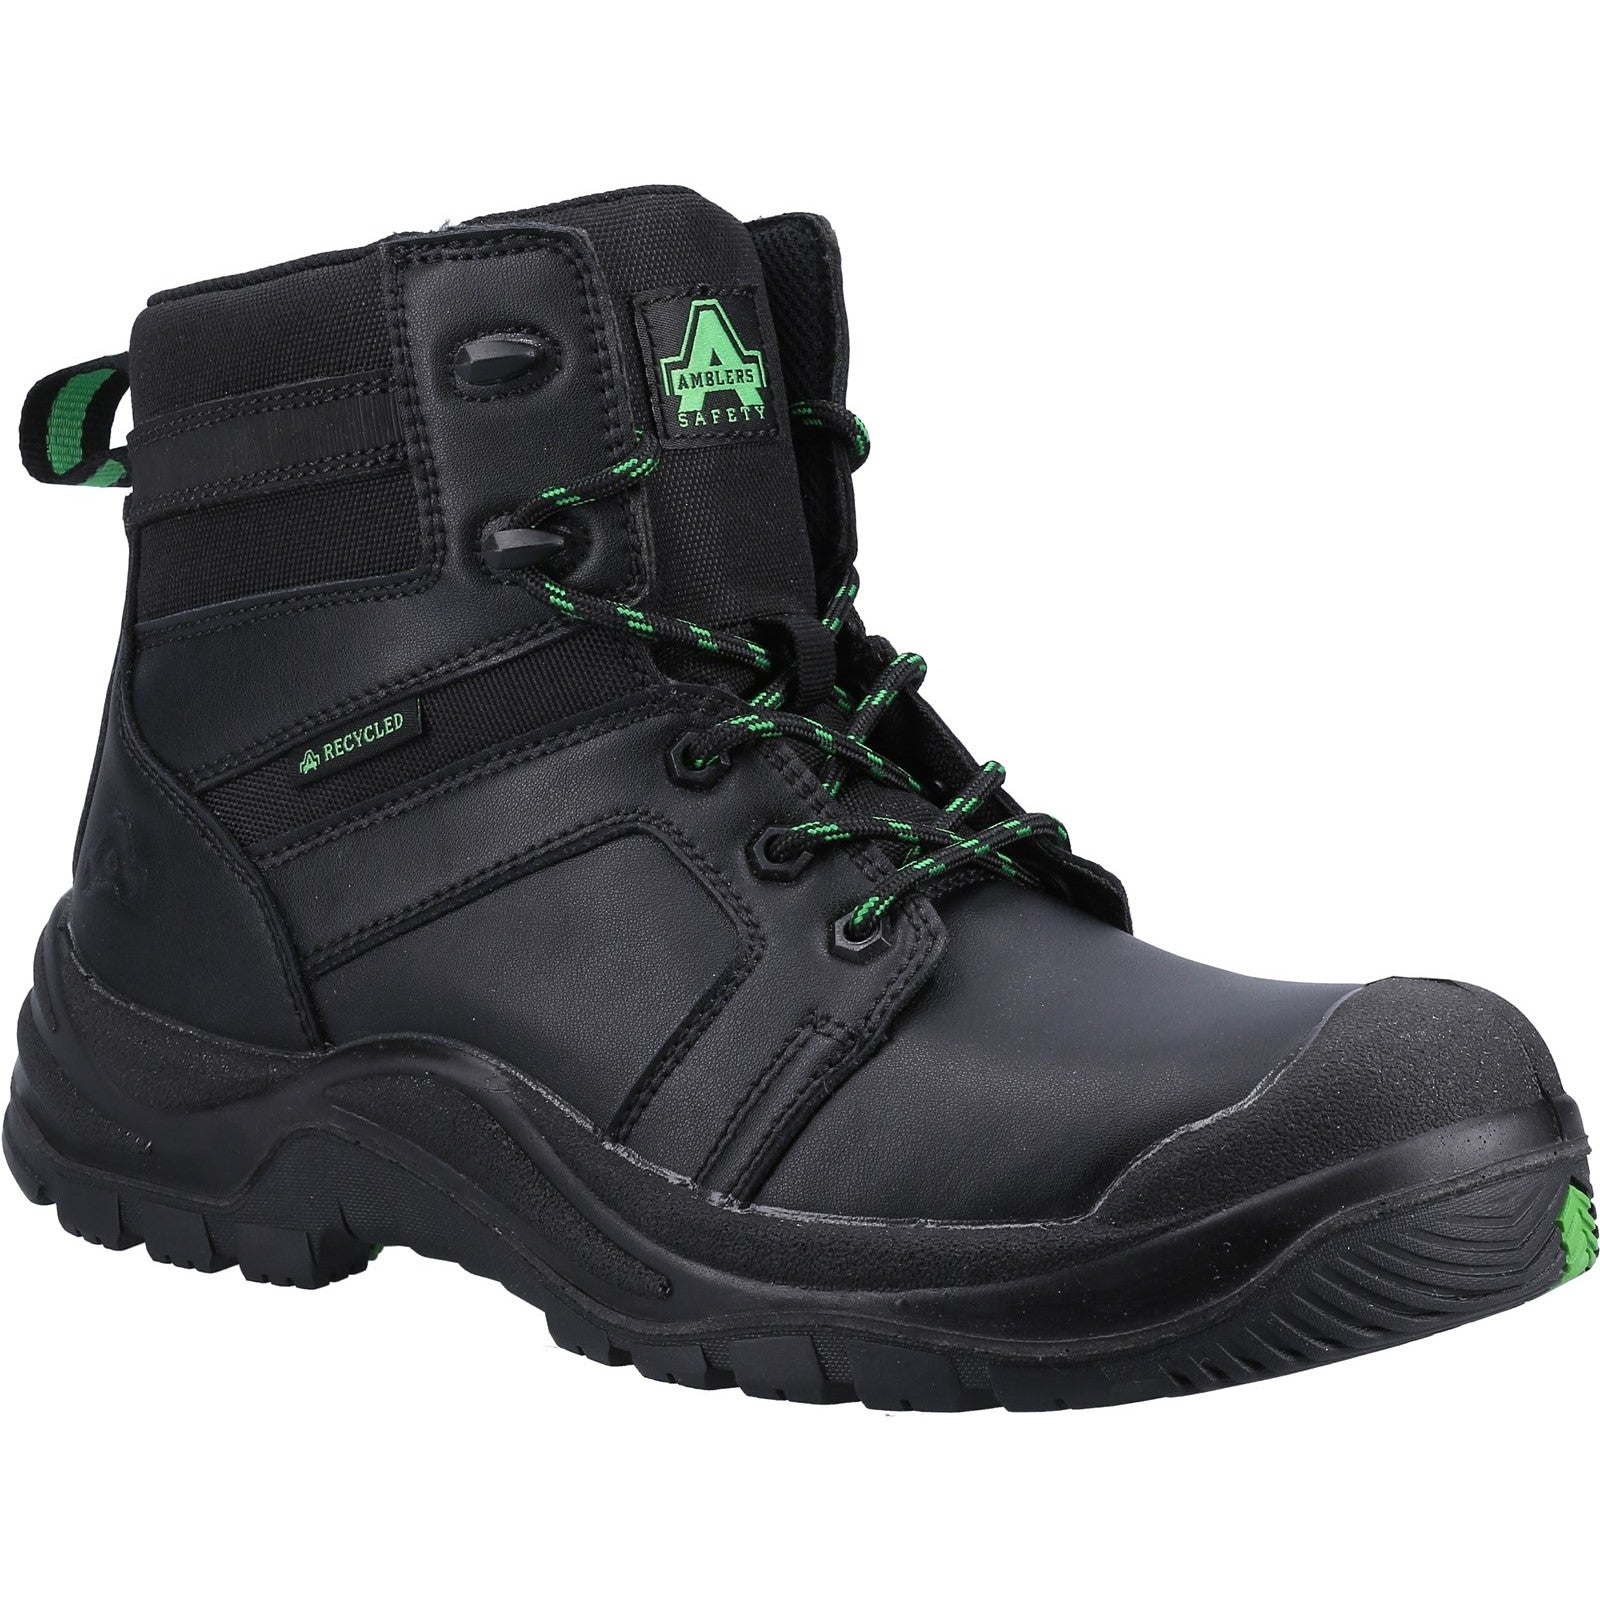 Amblers Safety 502 Safety Boots